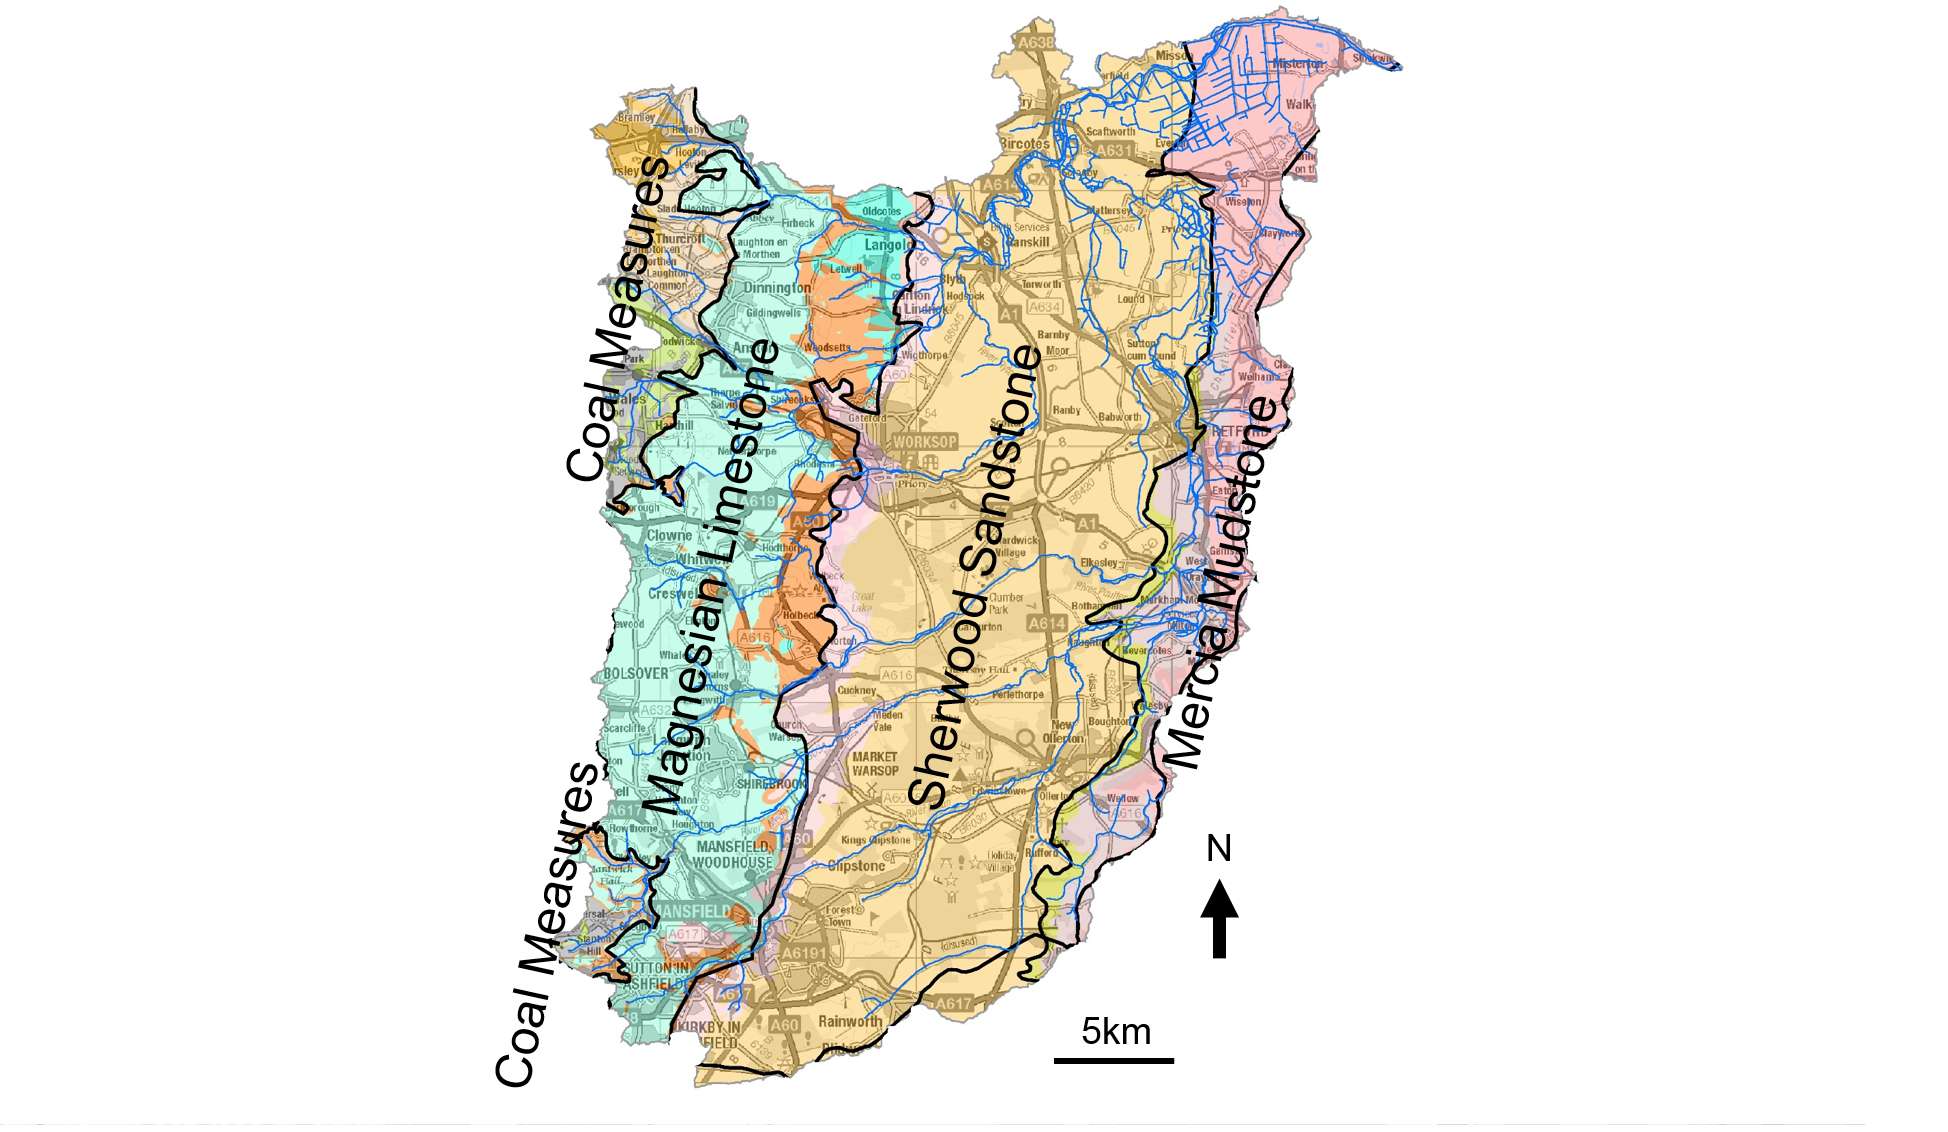 A map showing the bedrock geology in the idle catchment, made up of limestone, sandstone and mudstone.